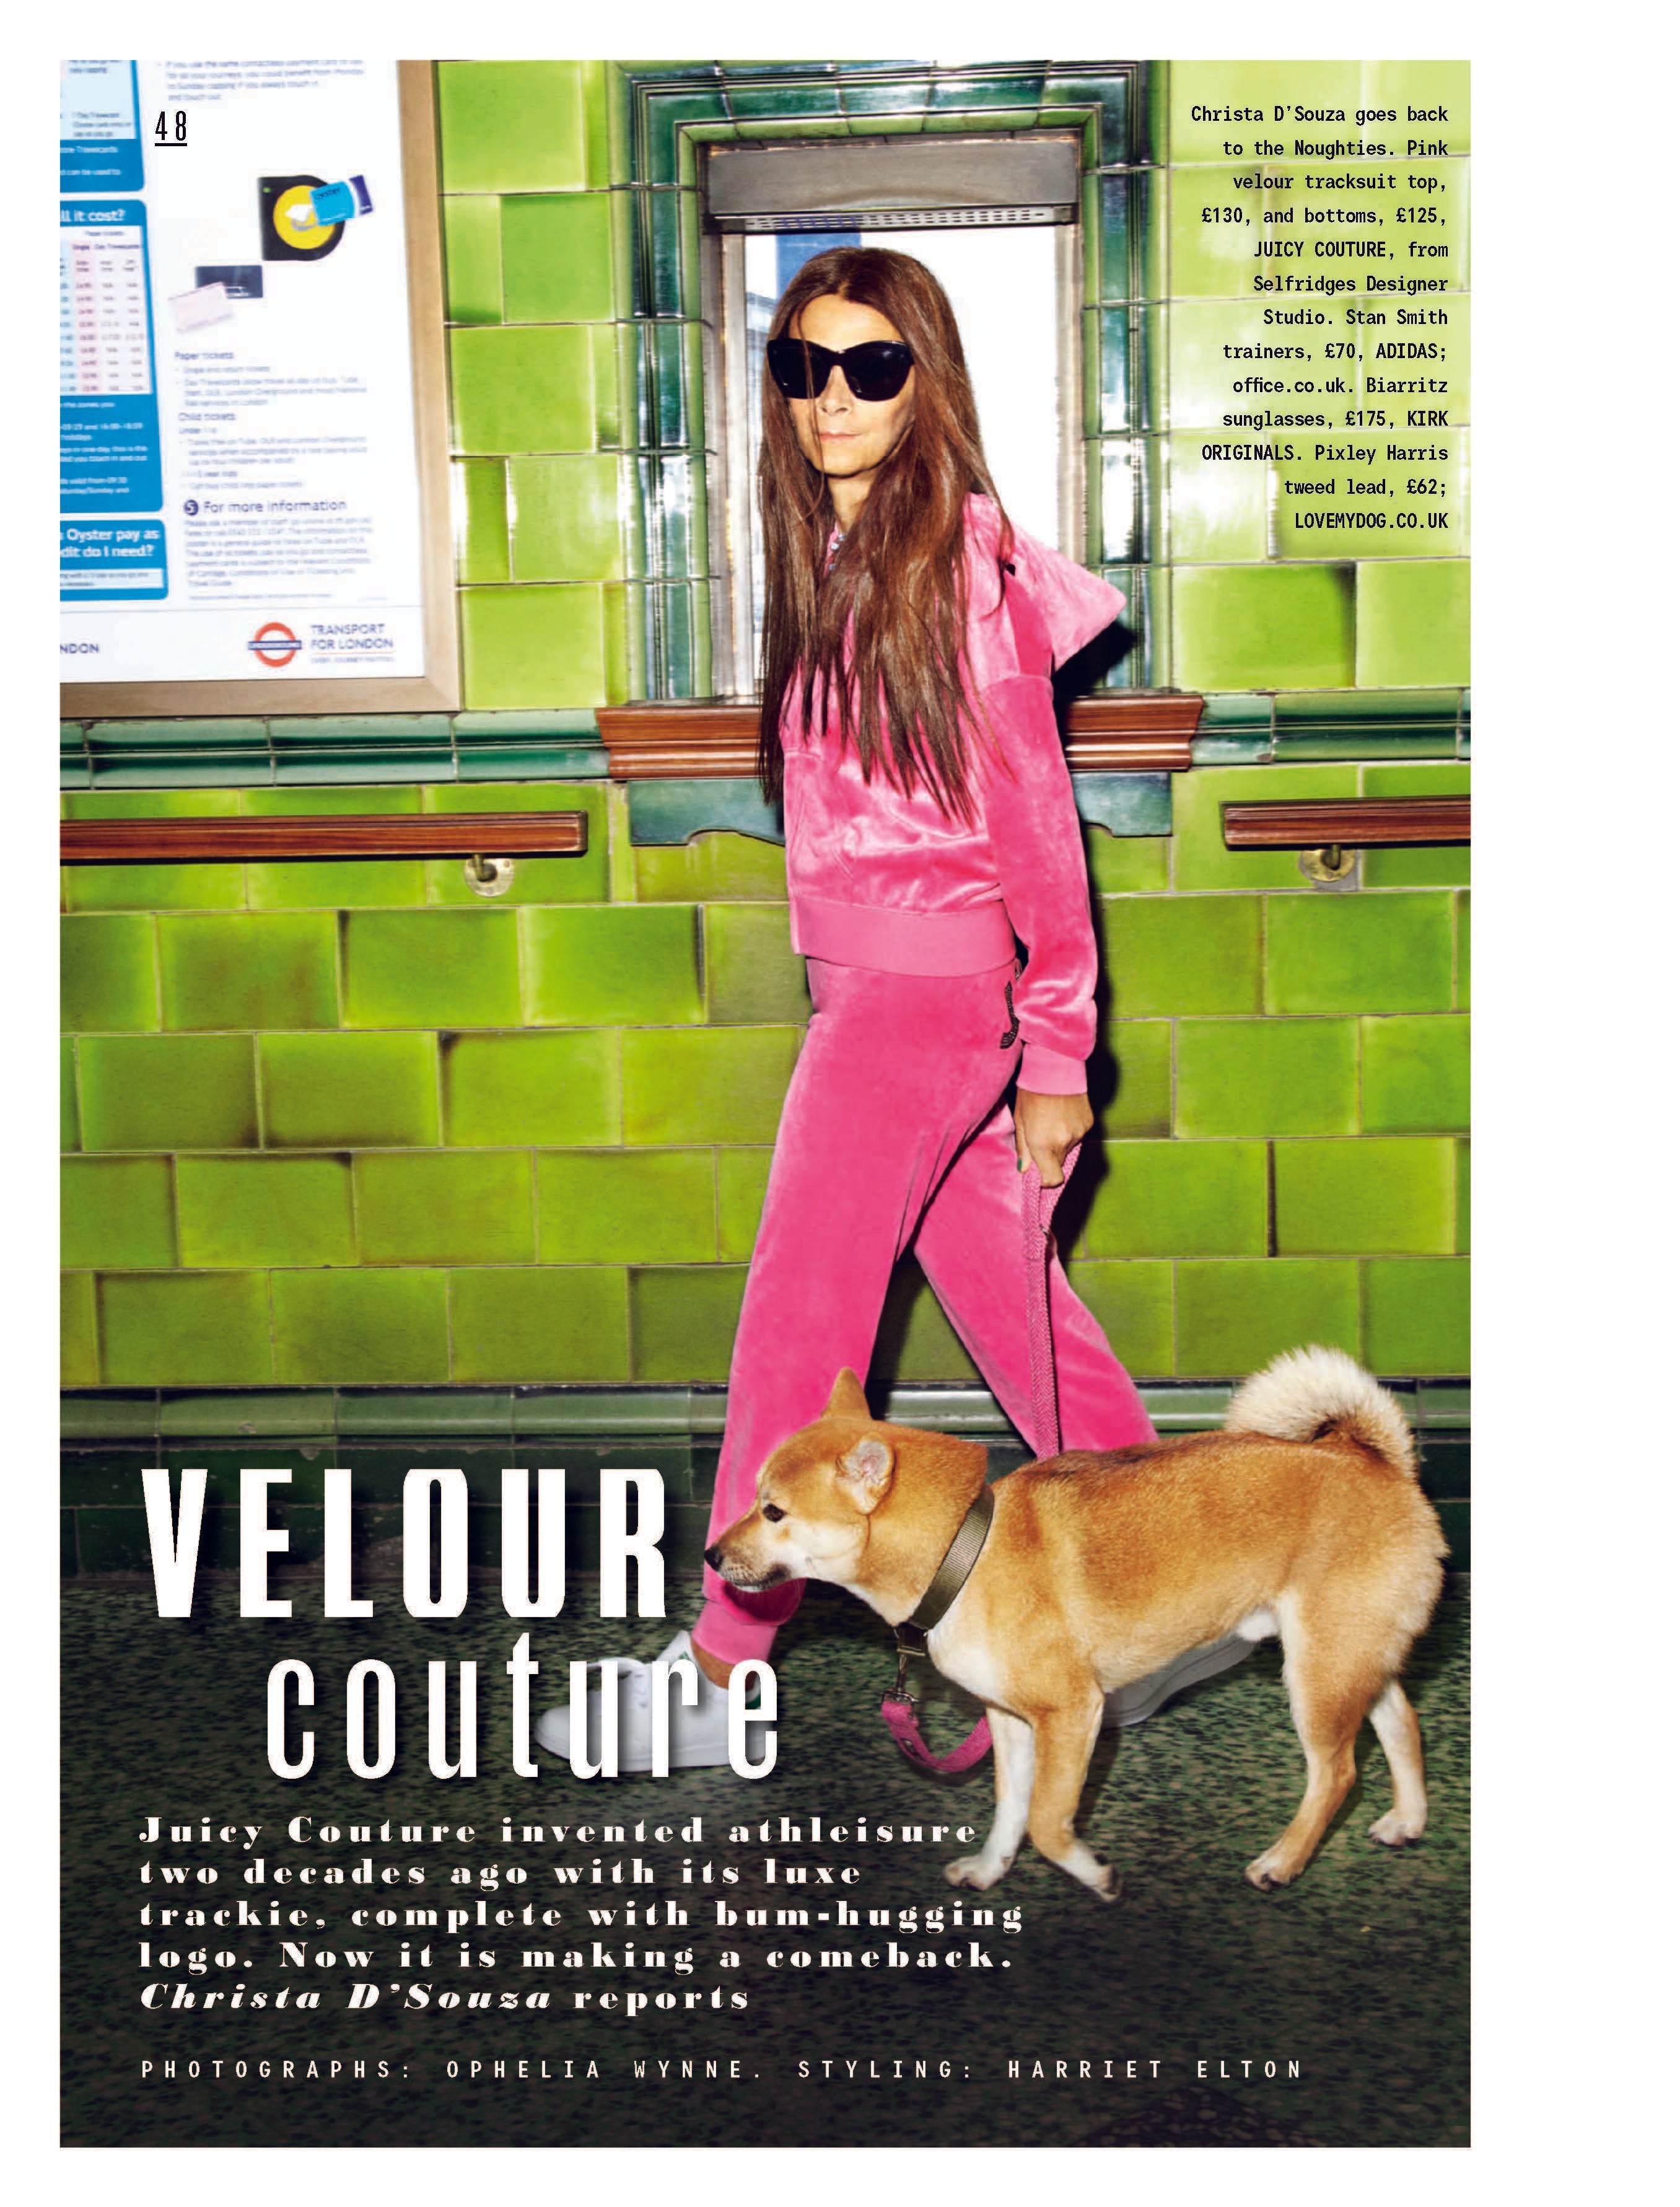 dog, dogs, style, magazine, press, editorial, couture, velour